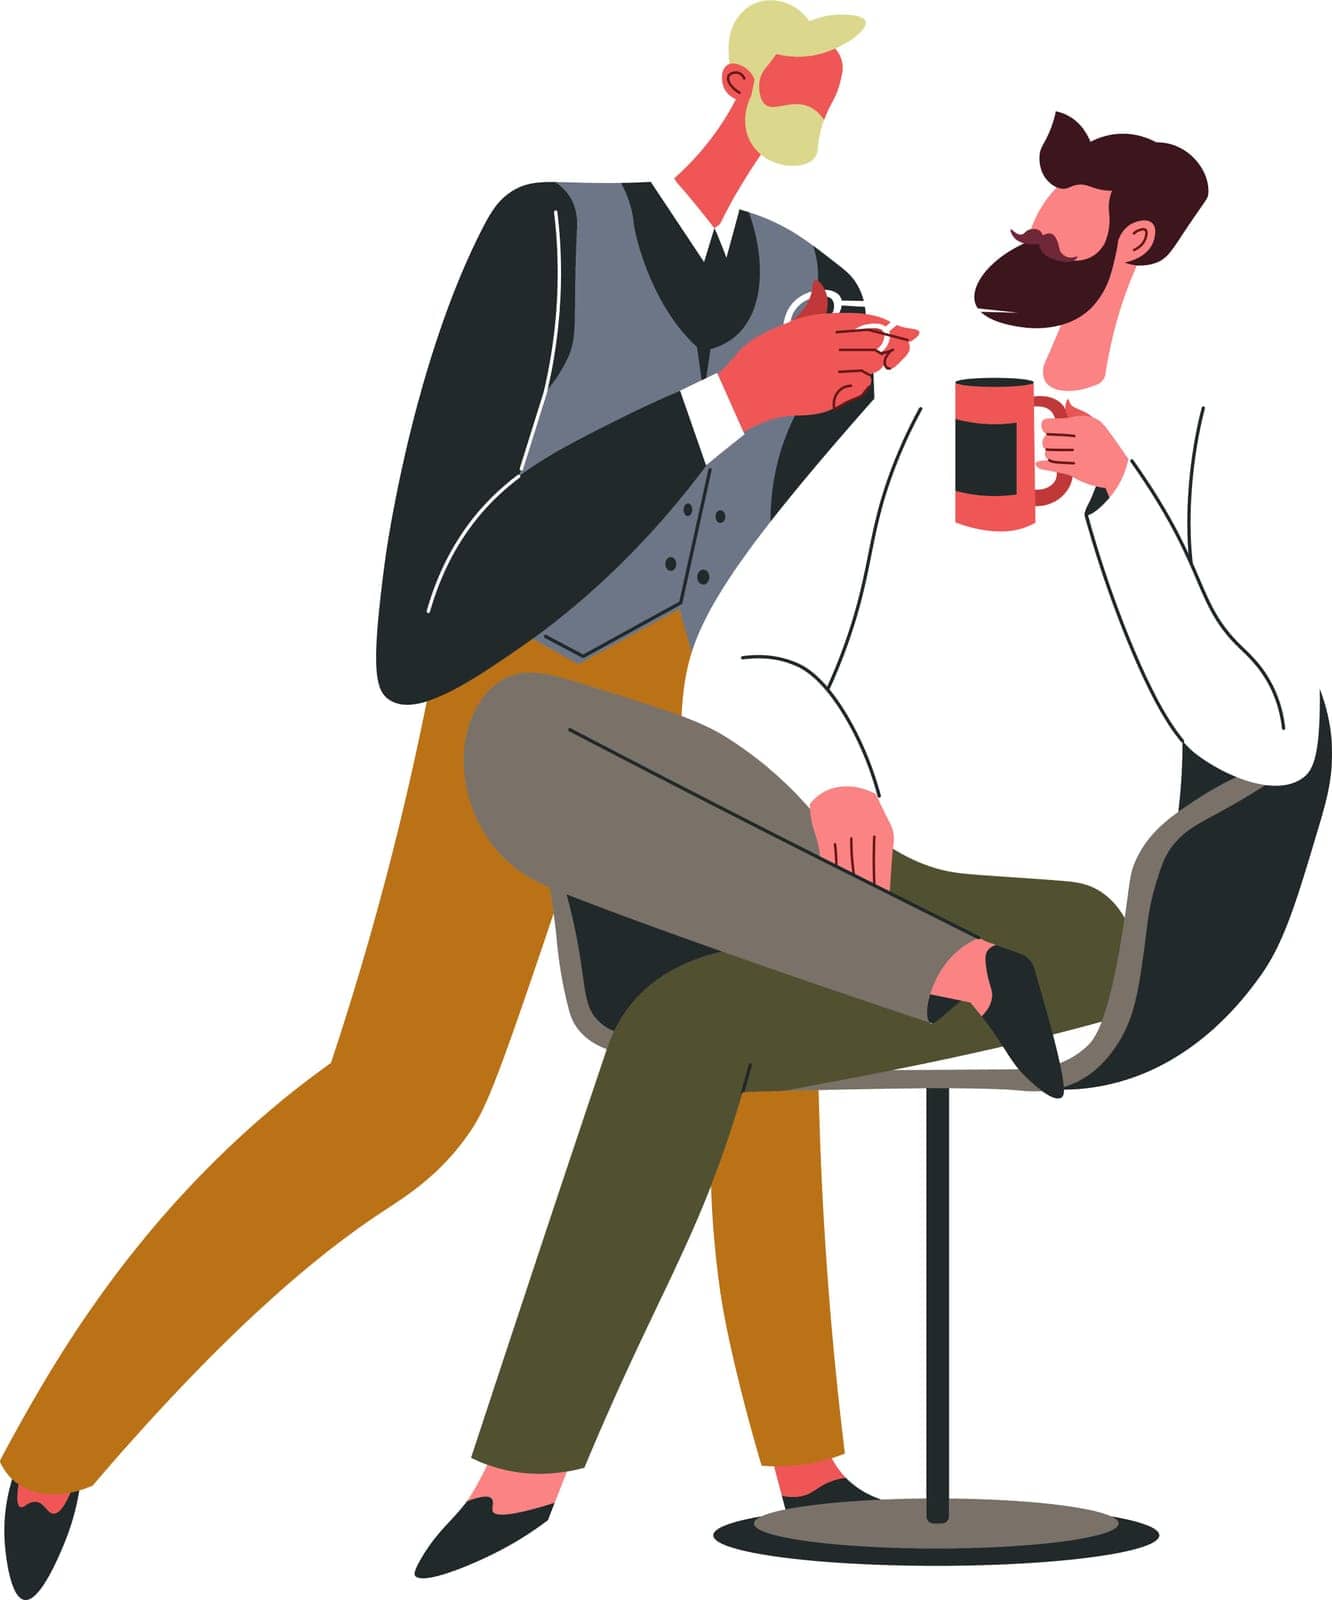 Service at barber shop, isolated male character sitting in chair relaxing and drinking tea or coffee. Professional specialist taking care, luxurious and trendy place to cut hair. Vector in flat style